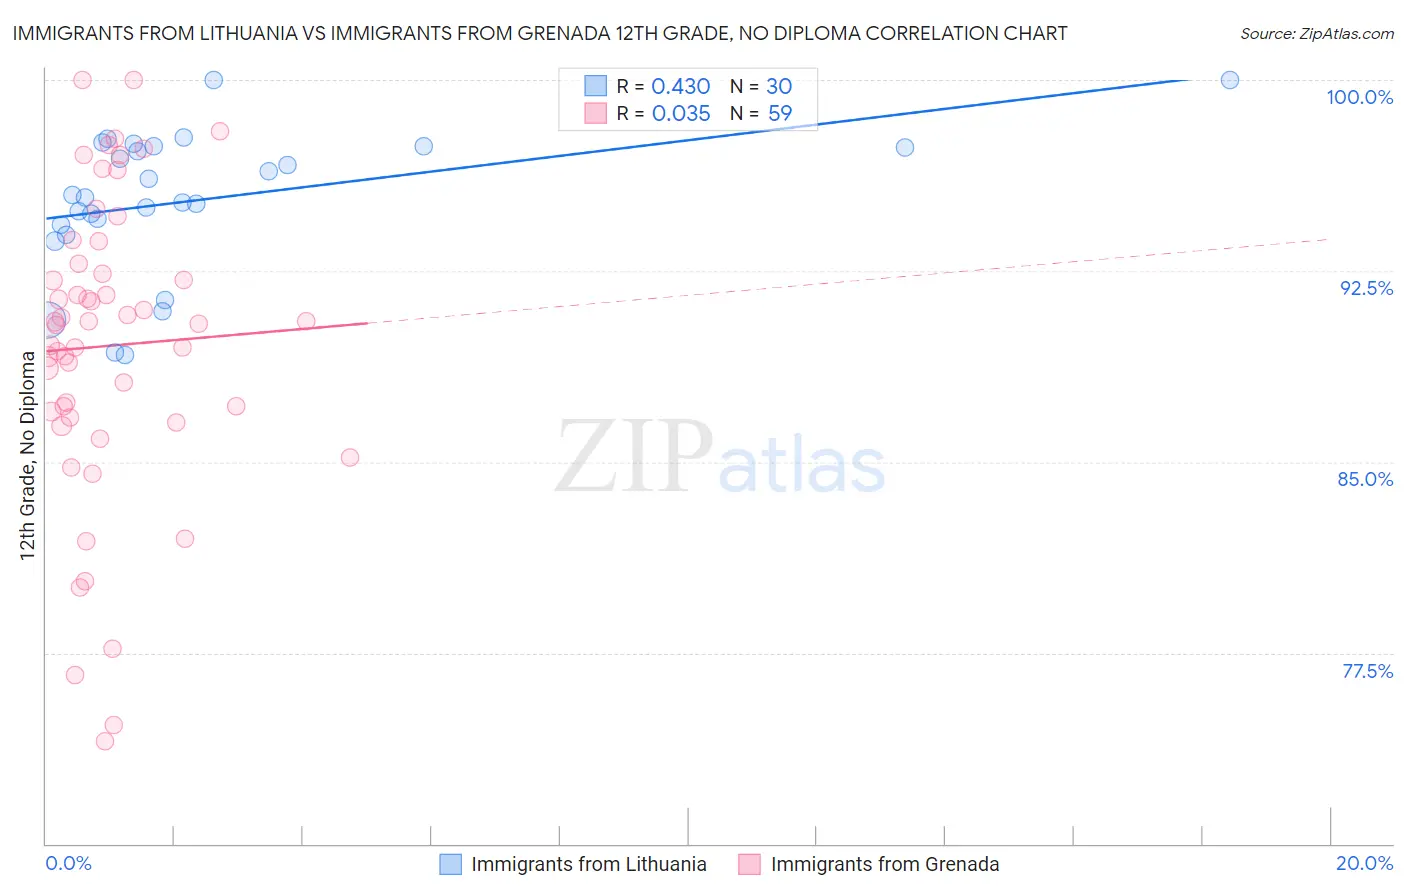 Immigrants from Lithuania vs Immigrants from Grenada 12th Grade, No Diploma